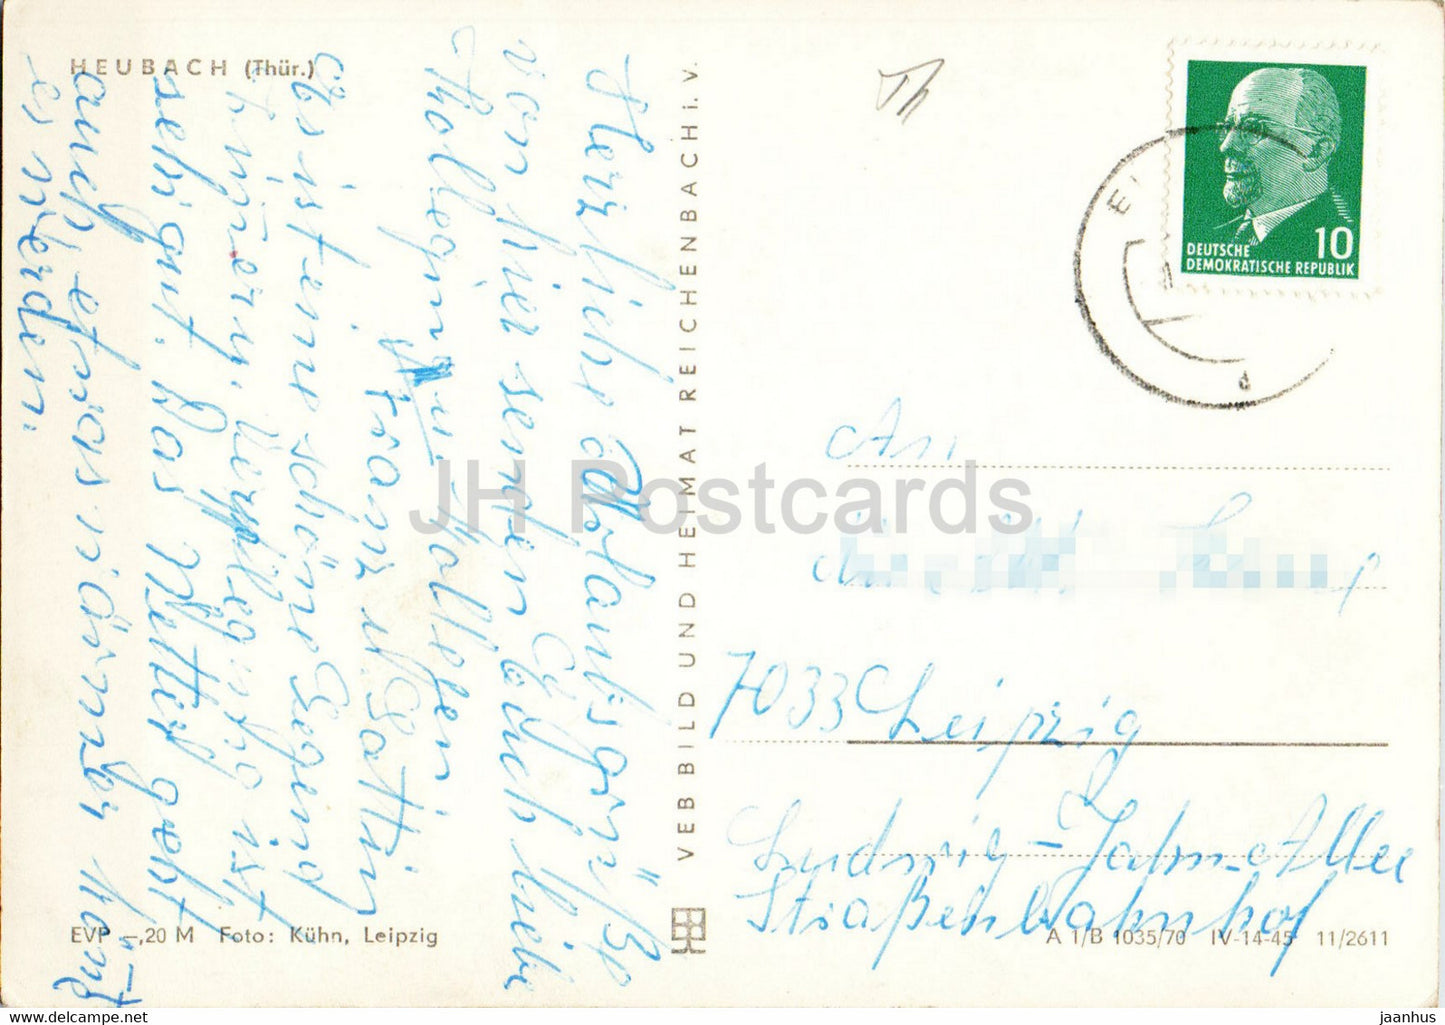 Heubach - Thur - old postcard - Germany DDR - used